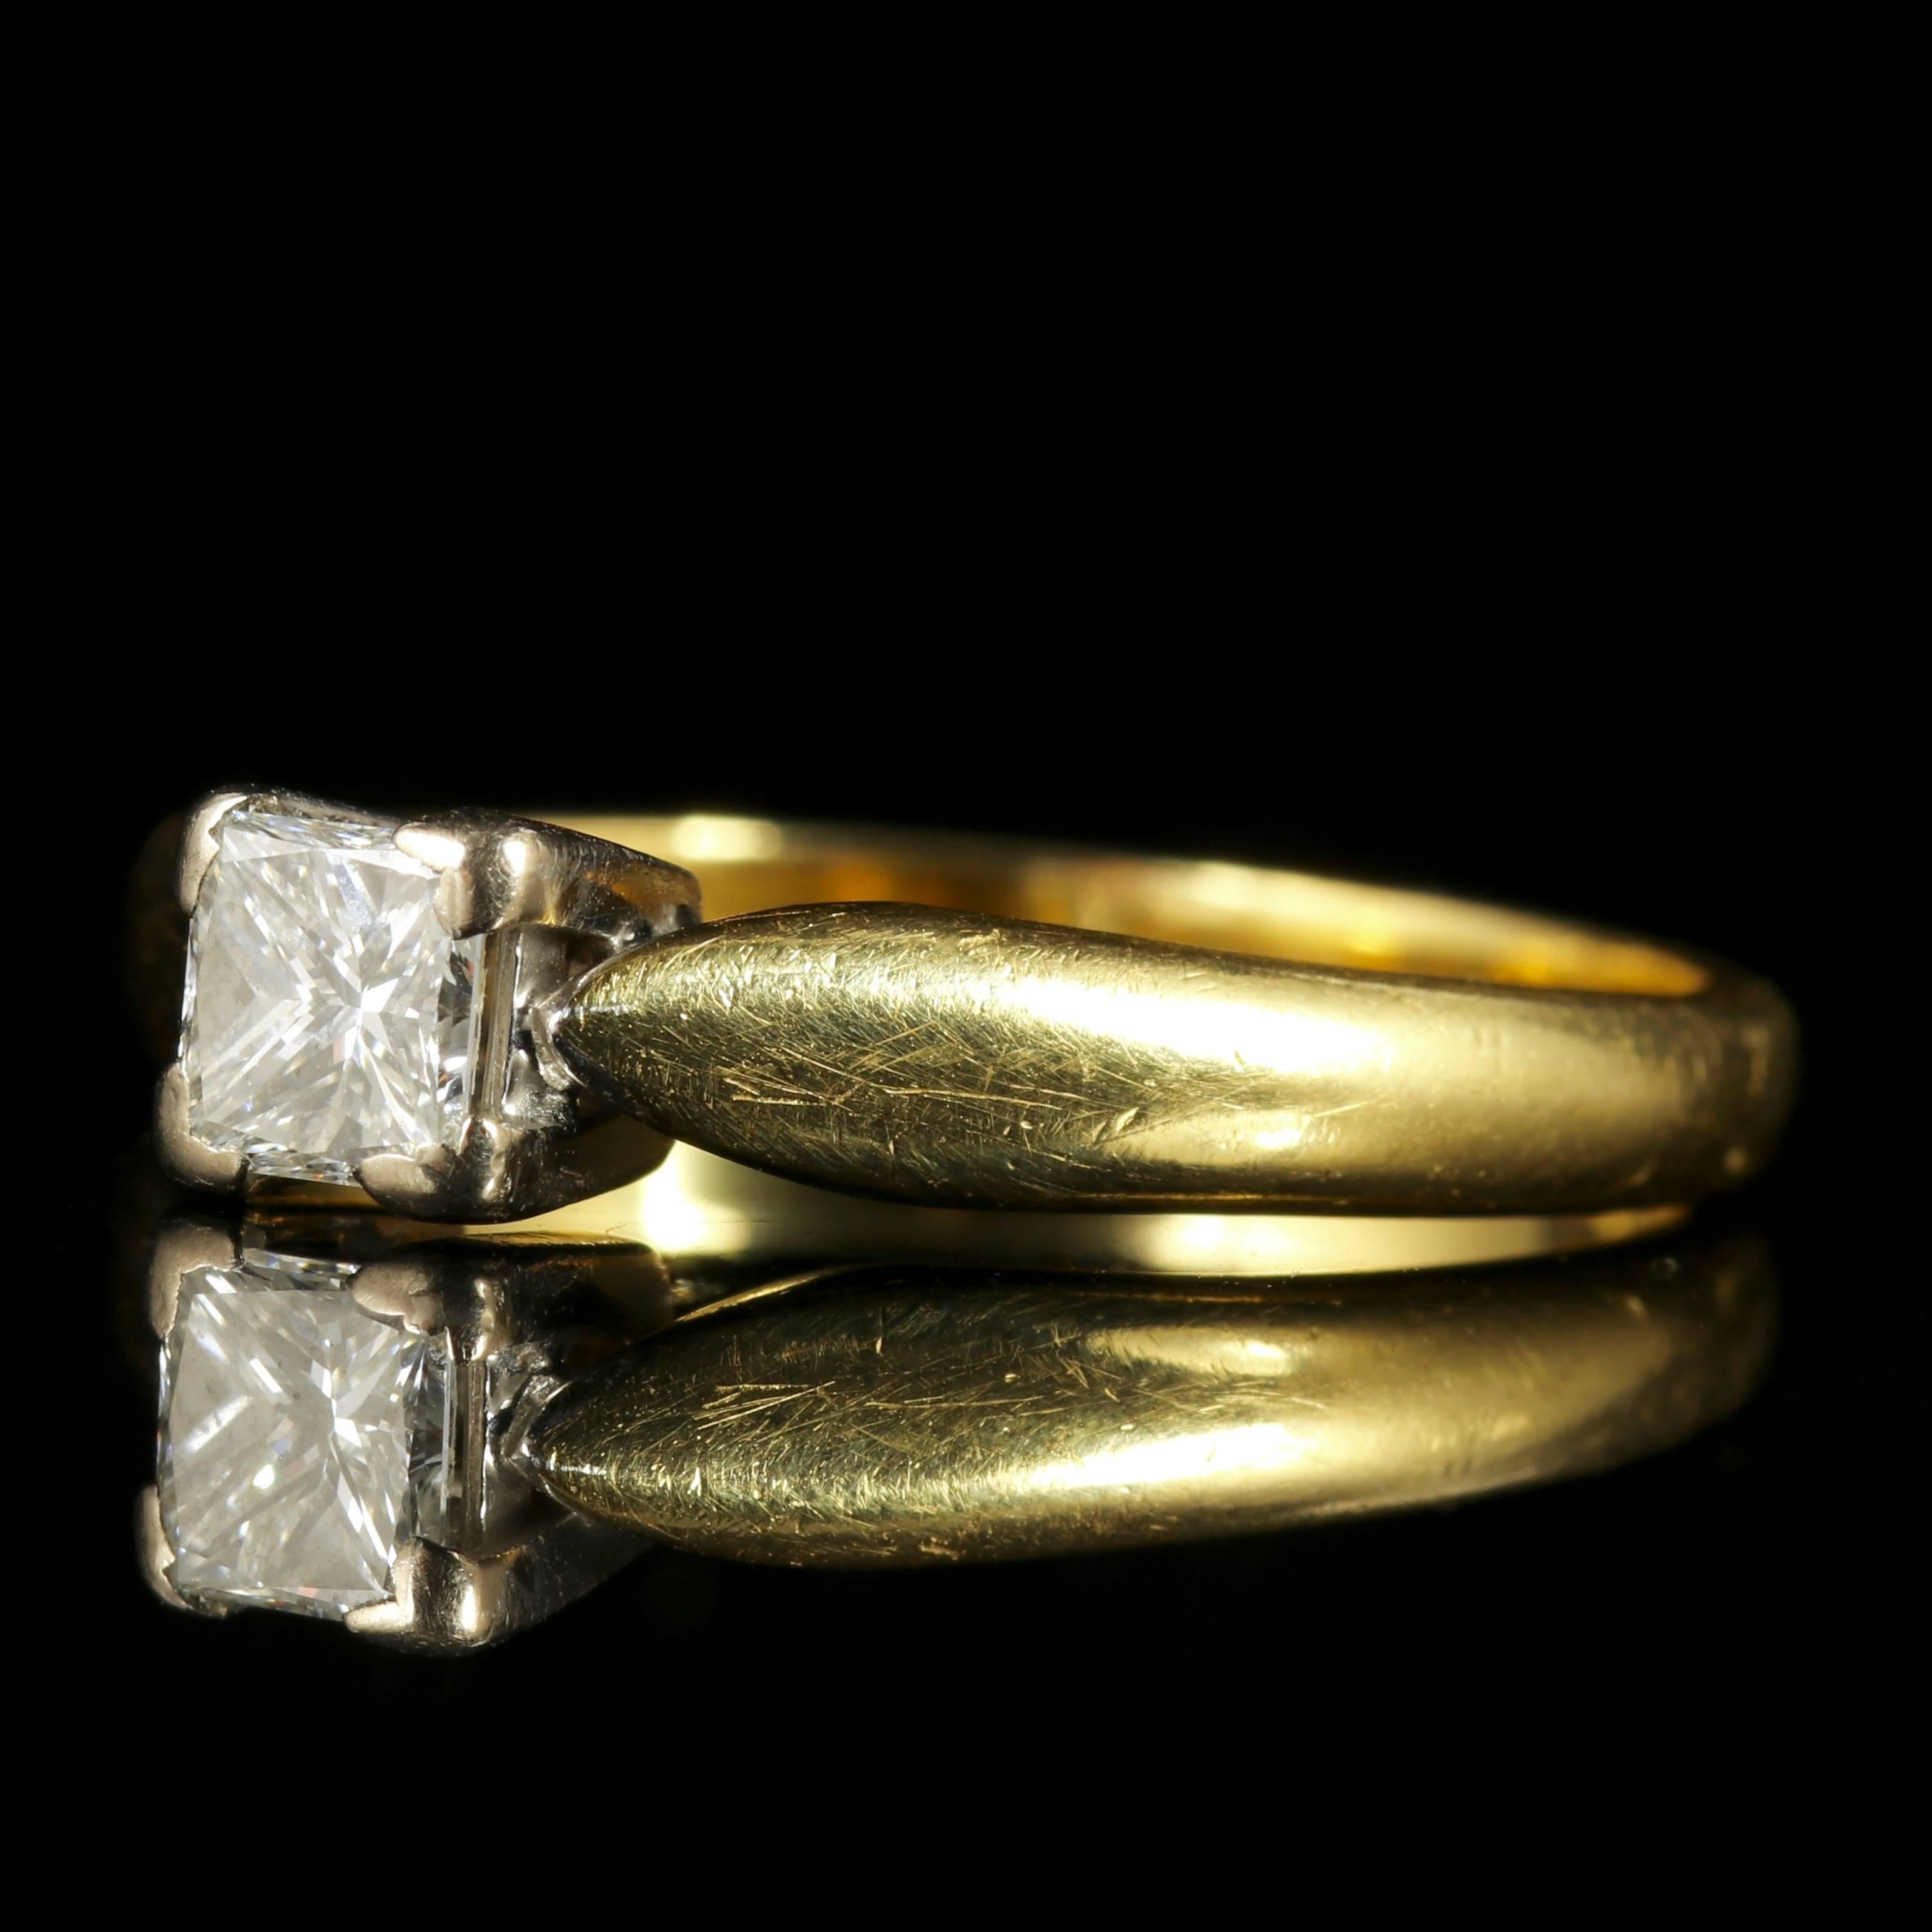 This genuine pre owned princess cut Diamond ring is dated Birmingham 1997.

The lovely ring is set in 18ct Yellow Gold and Platinum, hallmarked 18CT.

The central Diamond is 0.50ct in size and sparkles beautifully. 

The Diamond has superb clarity